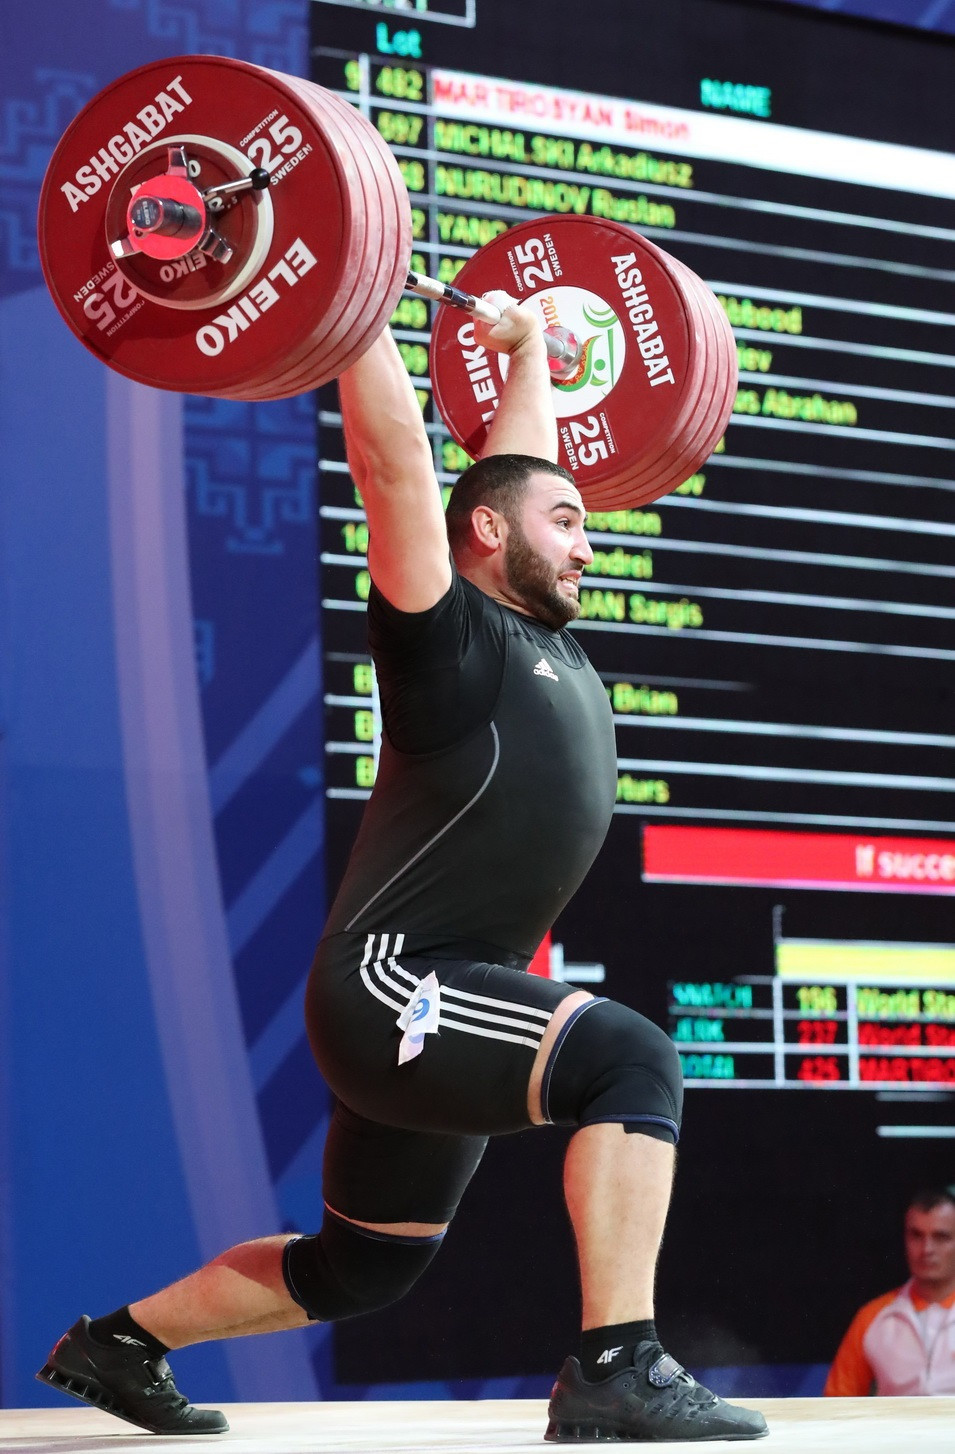 Armenia's Simon Martirosyan secured his first-ever global title after powering to victory in the men's 109 kilograms category on the penultimate day of the 2018 International Weightlifting Federation World Championships in Ashgabat ©IWF